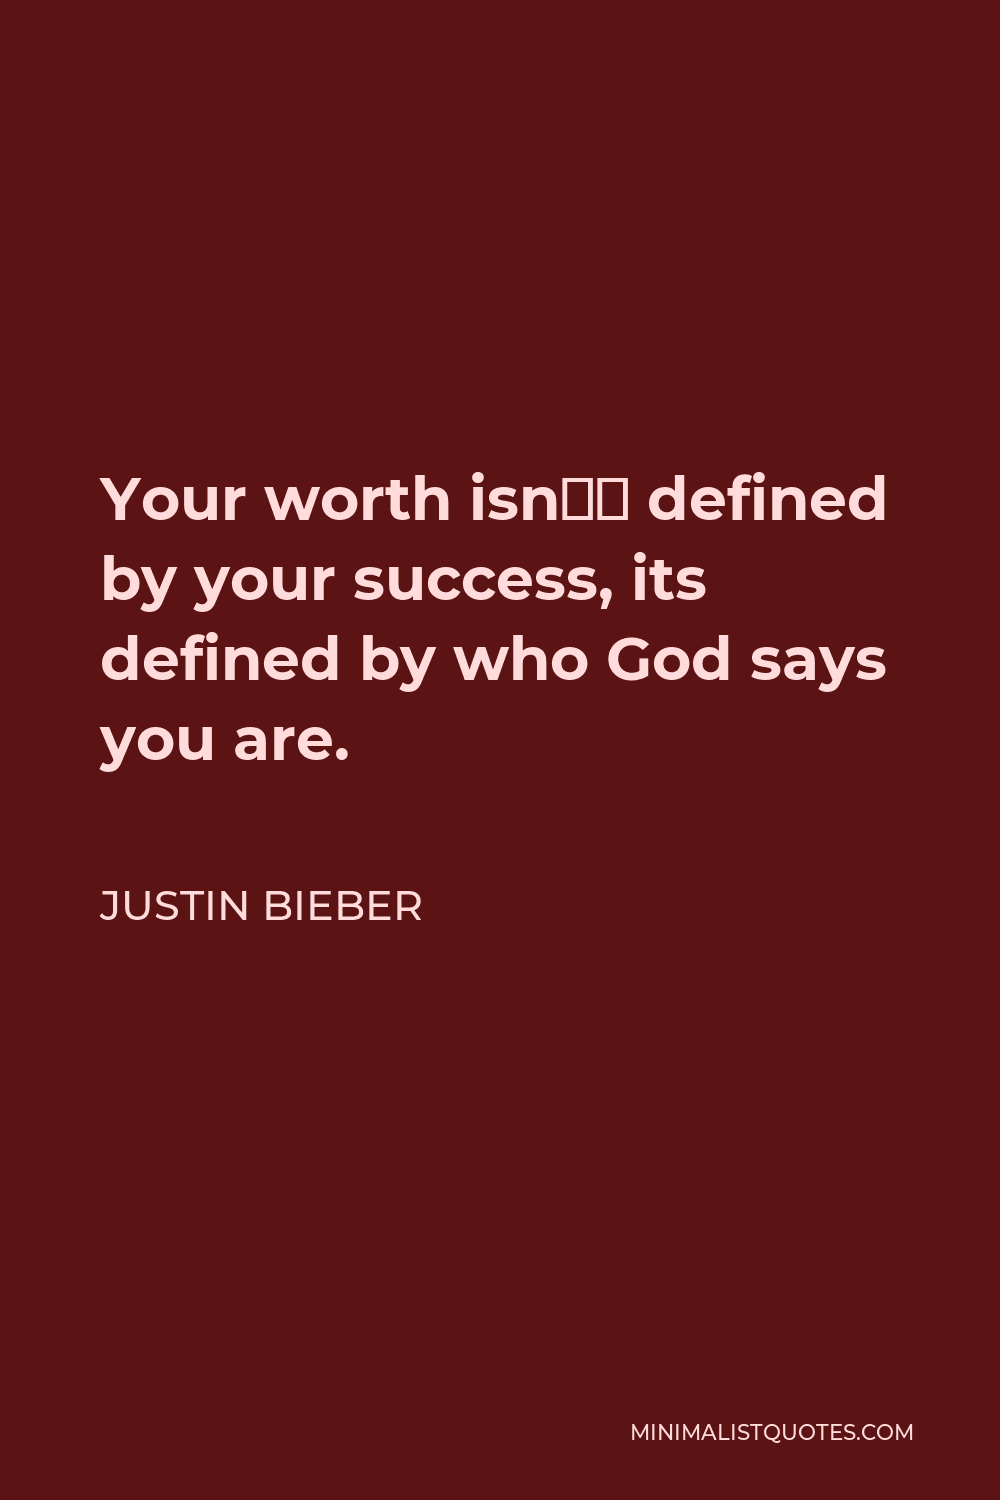 Justin Bieber Quote - Your worth isn’t defined by your success, its defined by who God says you are.